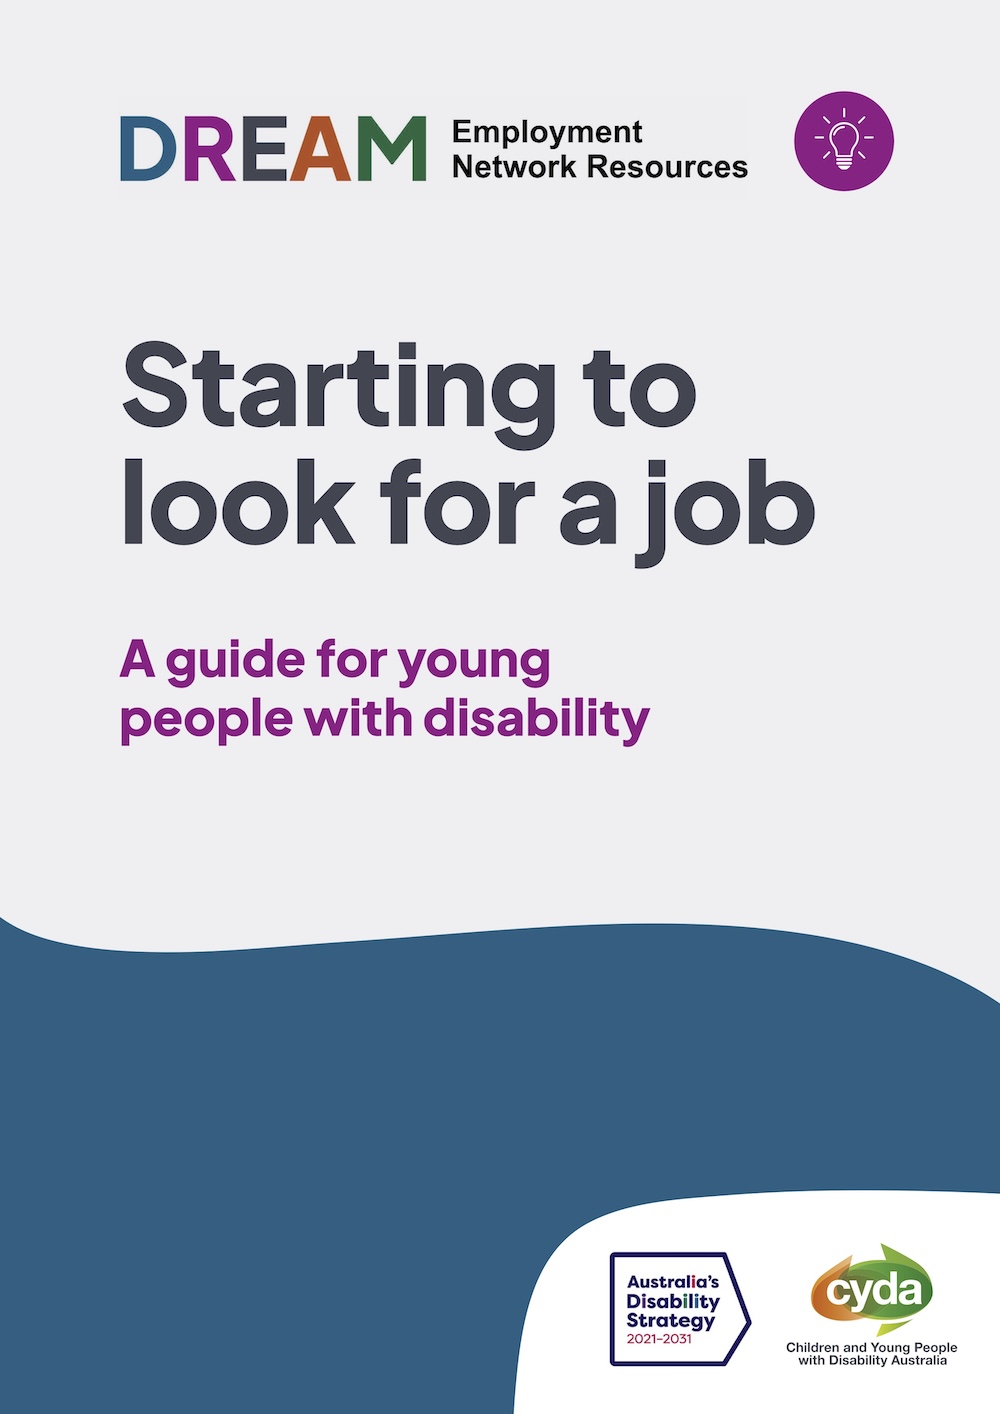 PDF Cover titled "Starting to look for a job, a guide for young people with disability" with the logo for the DREAM Employment Network with a purple lightbulb graphic up the top, and the logos for the Australian Disability Strategy and CYDA down the bottom.